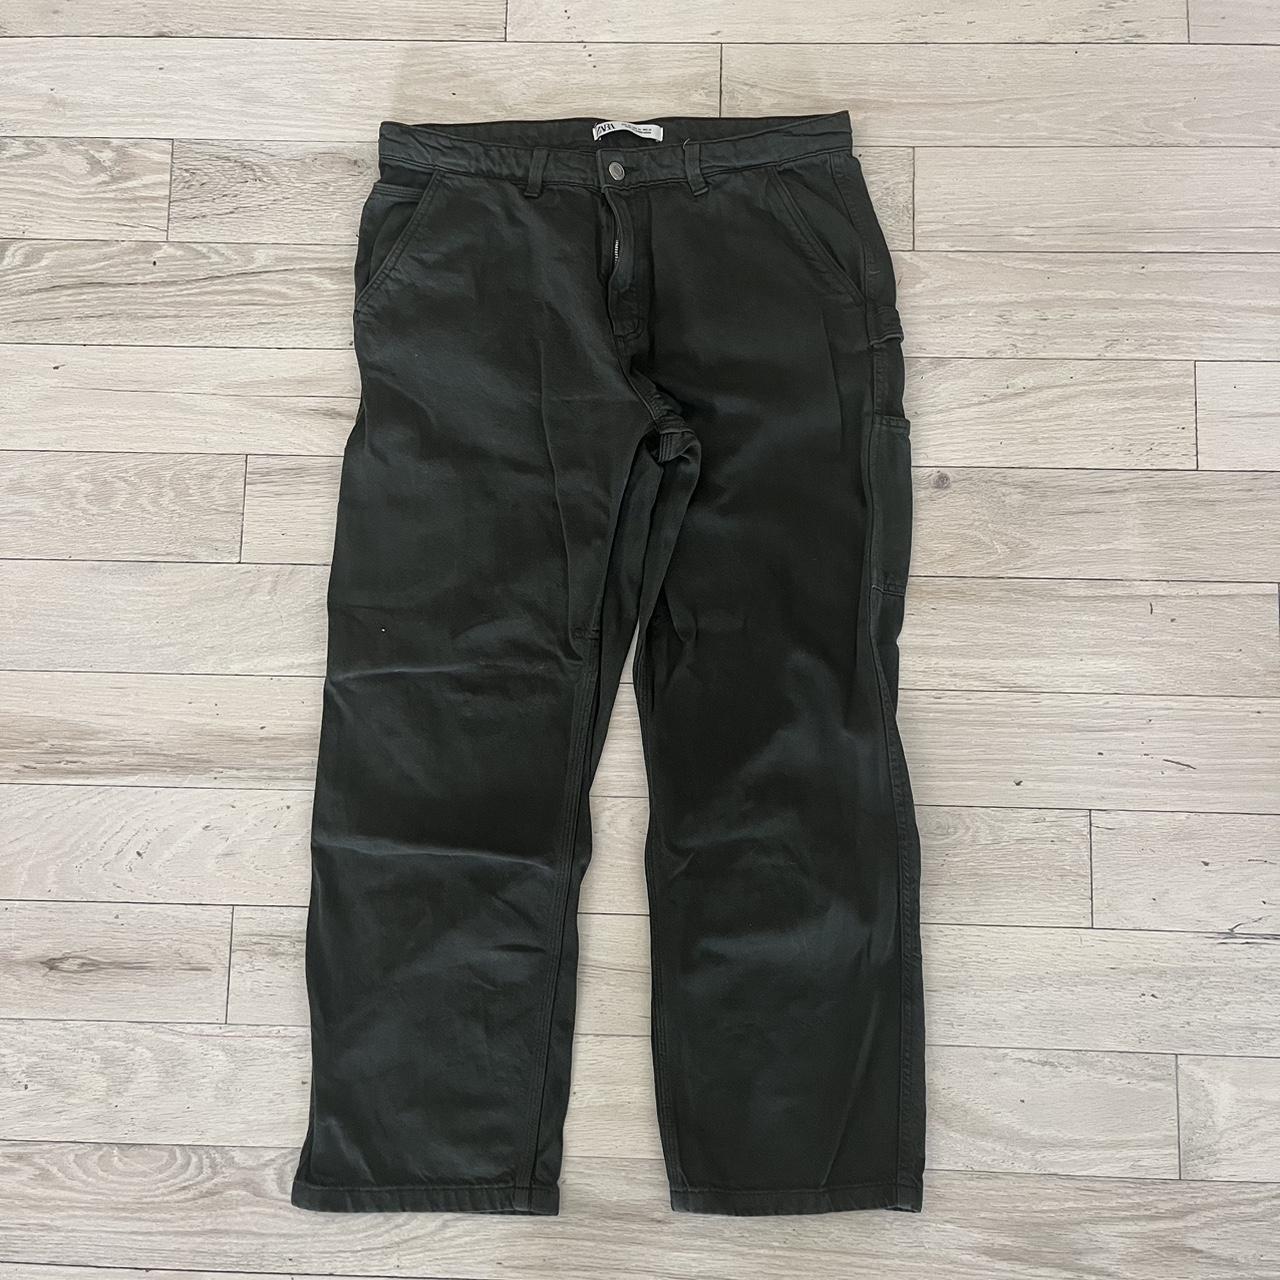 Zara cargo pants, size 31x31 and the condition is... - Depop